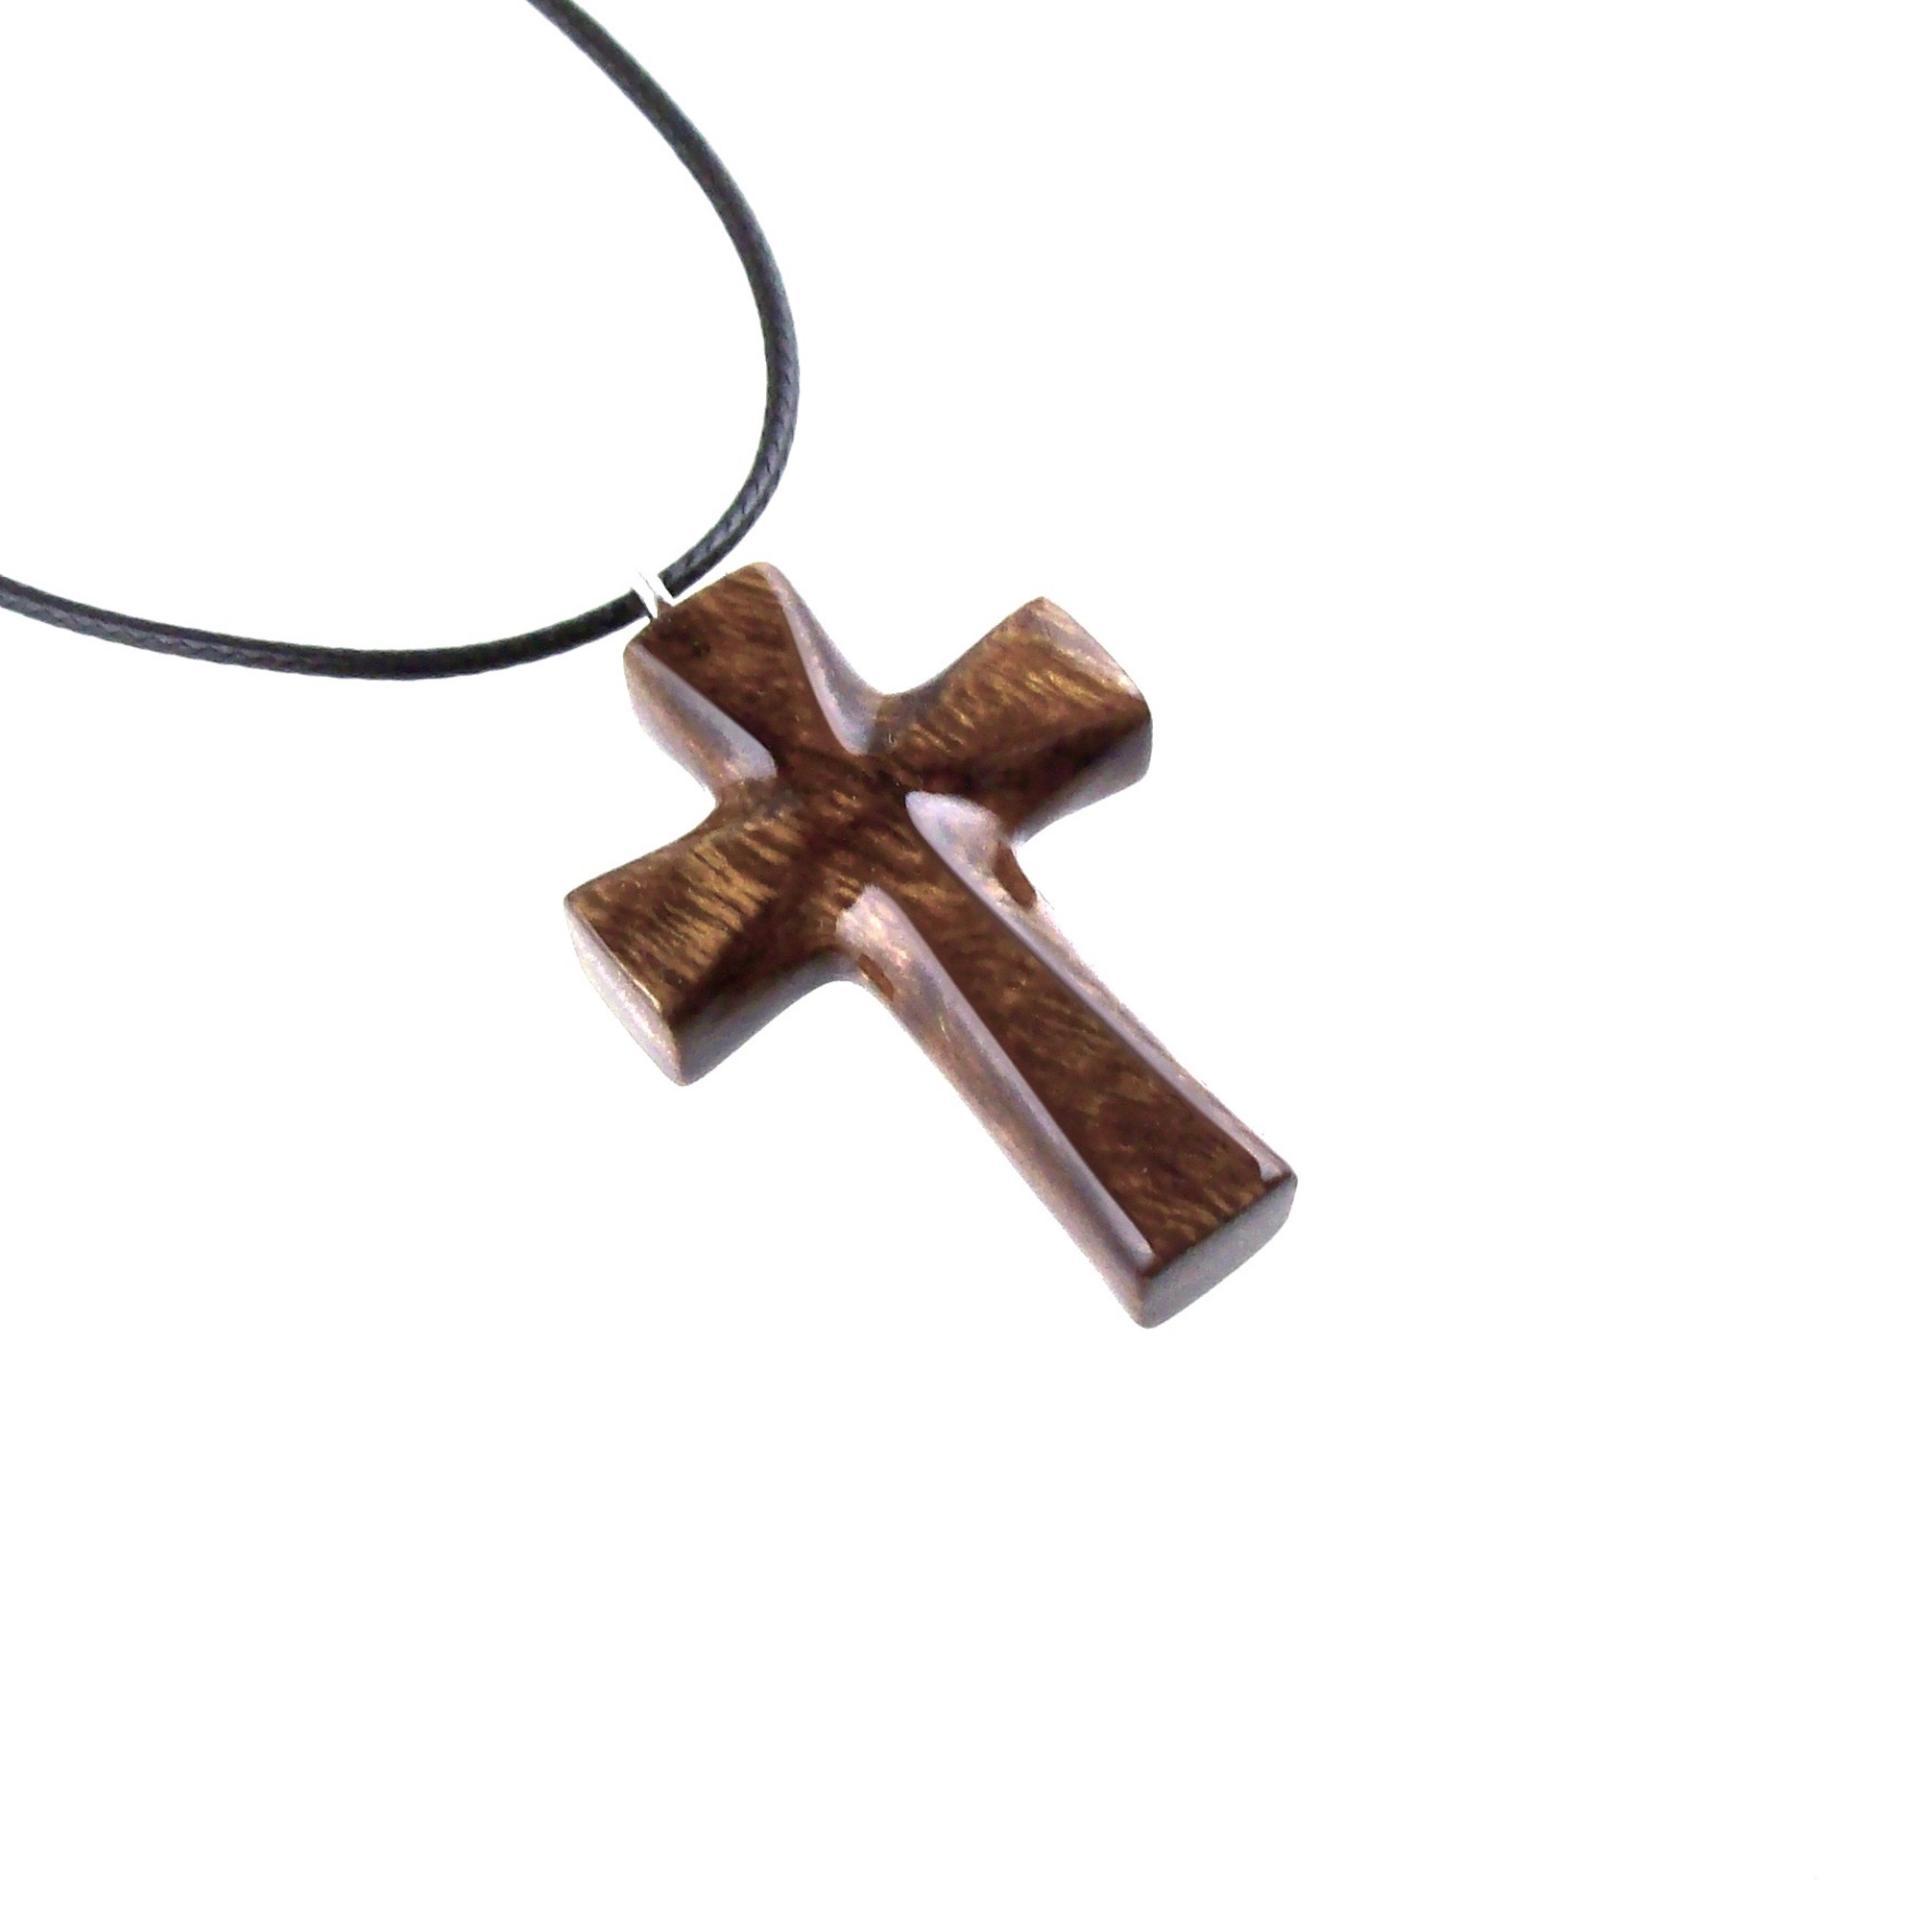 Handmade Wooden Cross Necklace, Hand Carved Wood Cross Pendant, Christian Jewelry for Men Women, Gift for Him or Her